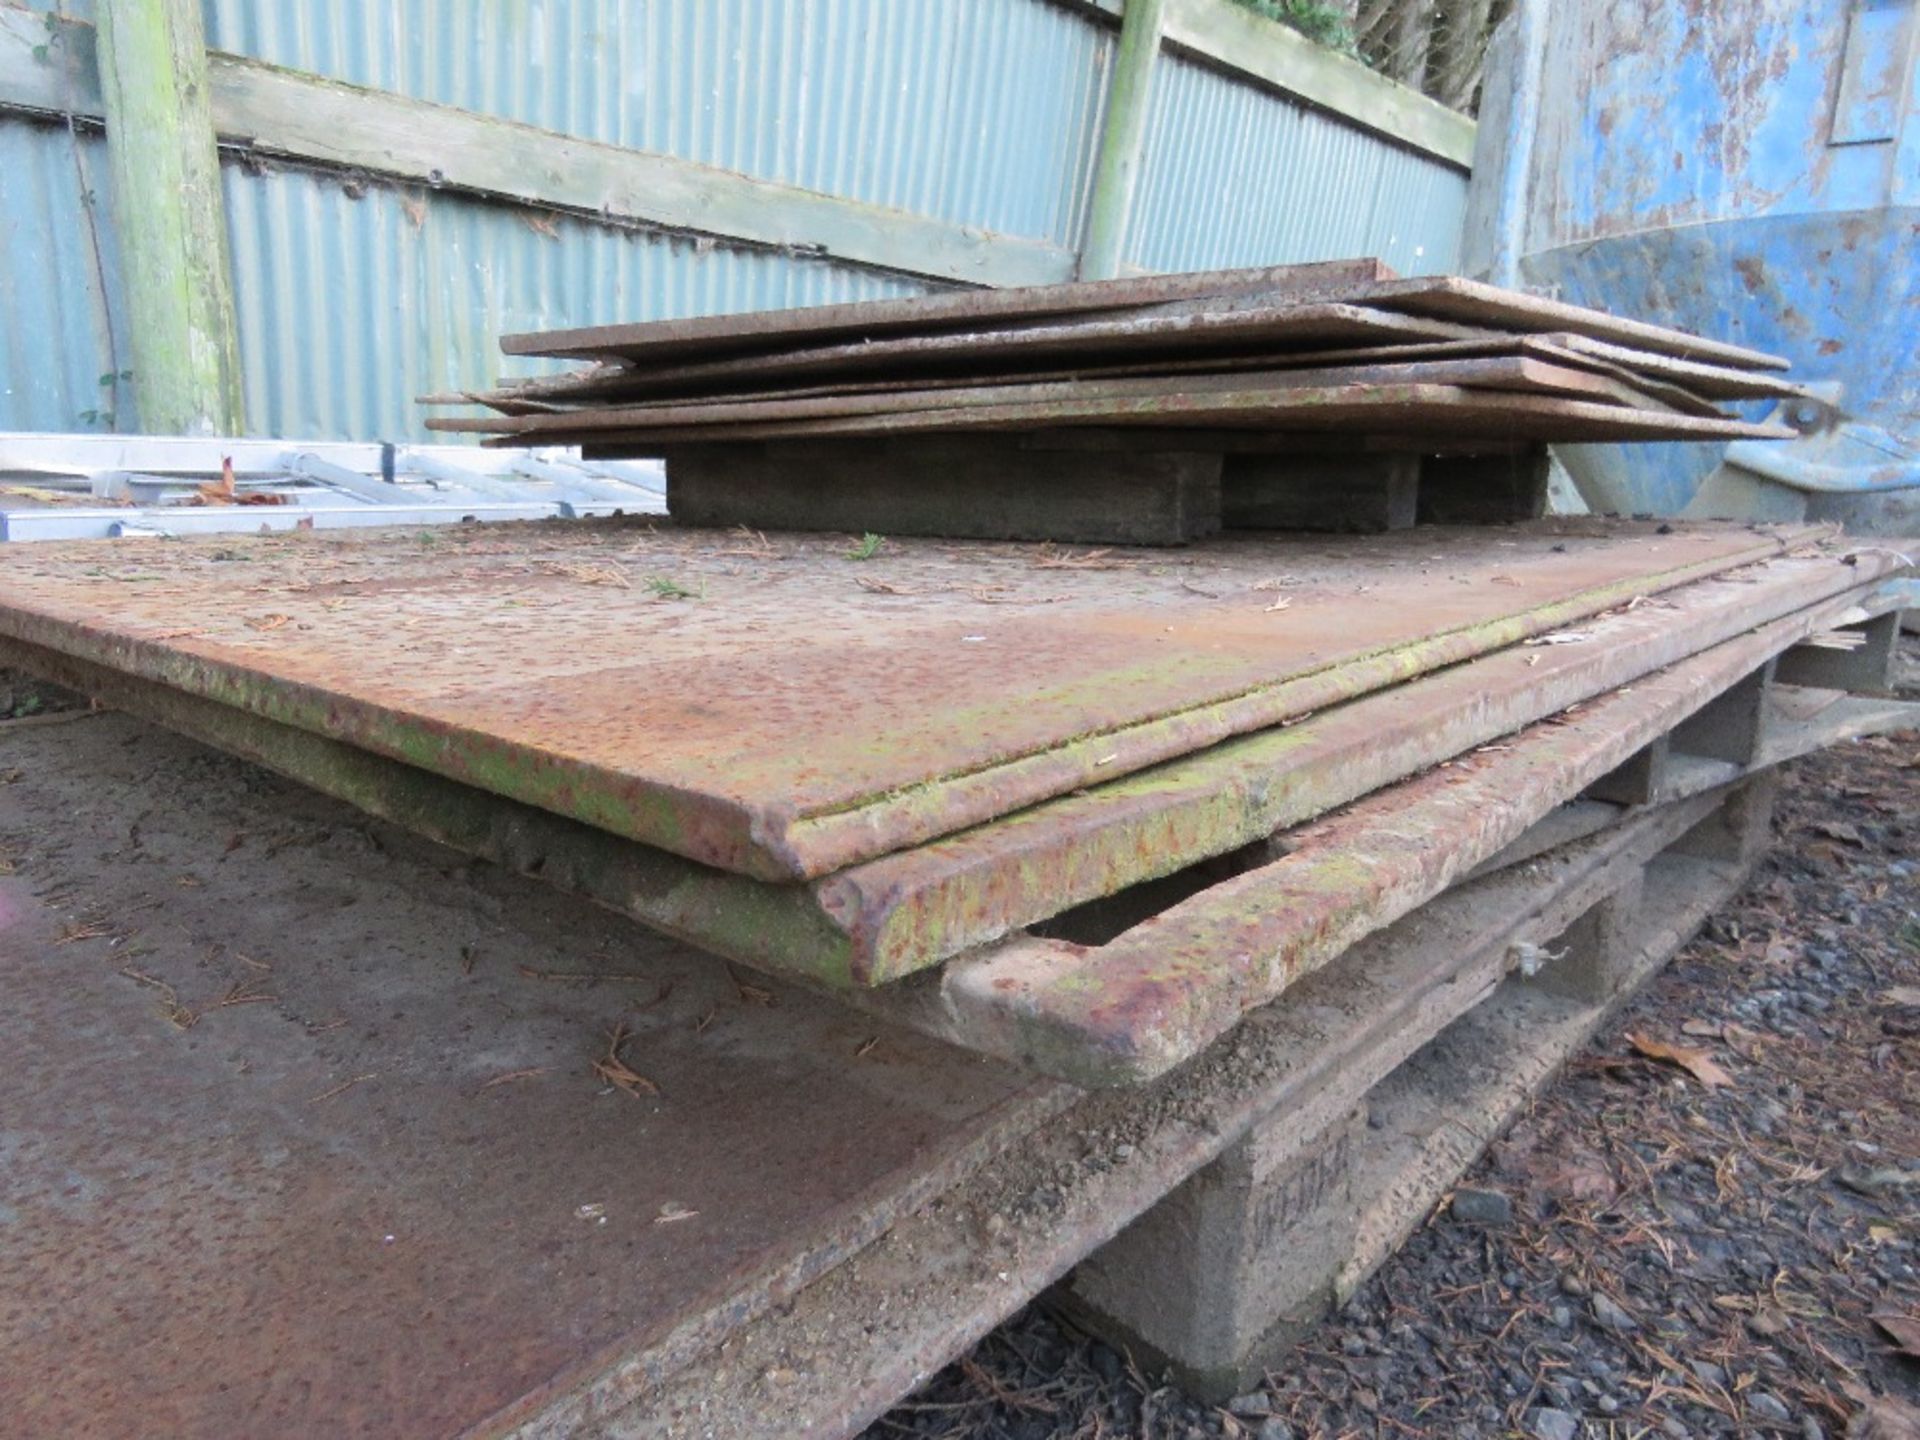 3 X HEAVY STEEL ROAD PLATES: 1.8M X 1.25M APPROX @ 15-20MM THICKNESS APPROX. - Image 3 of 3